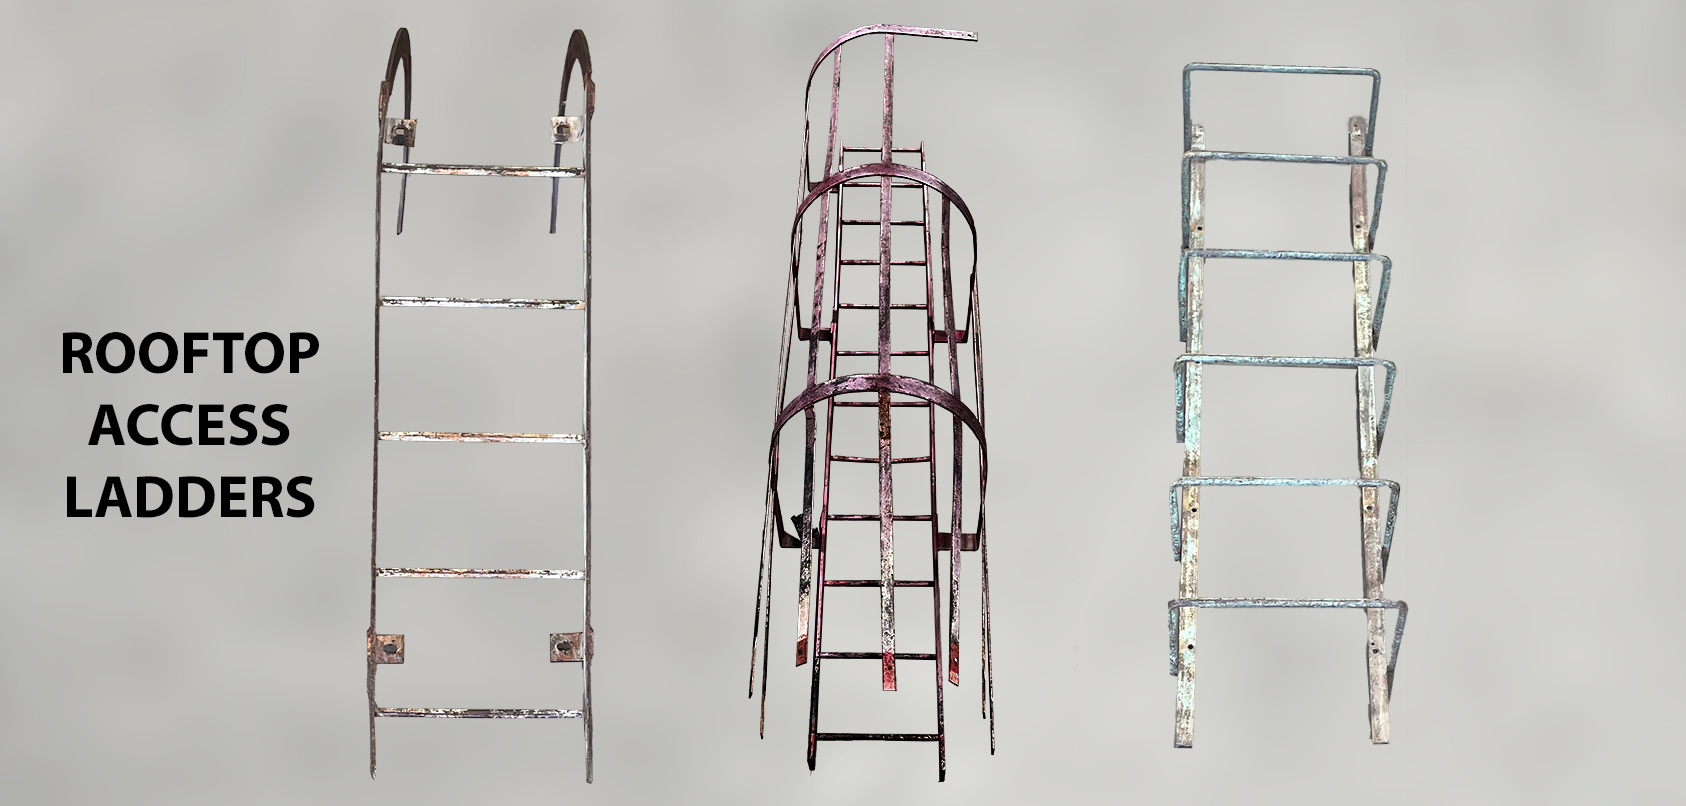 Rooftop Access Ladders